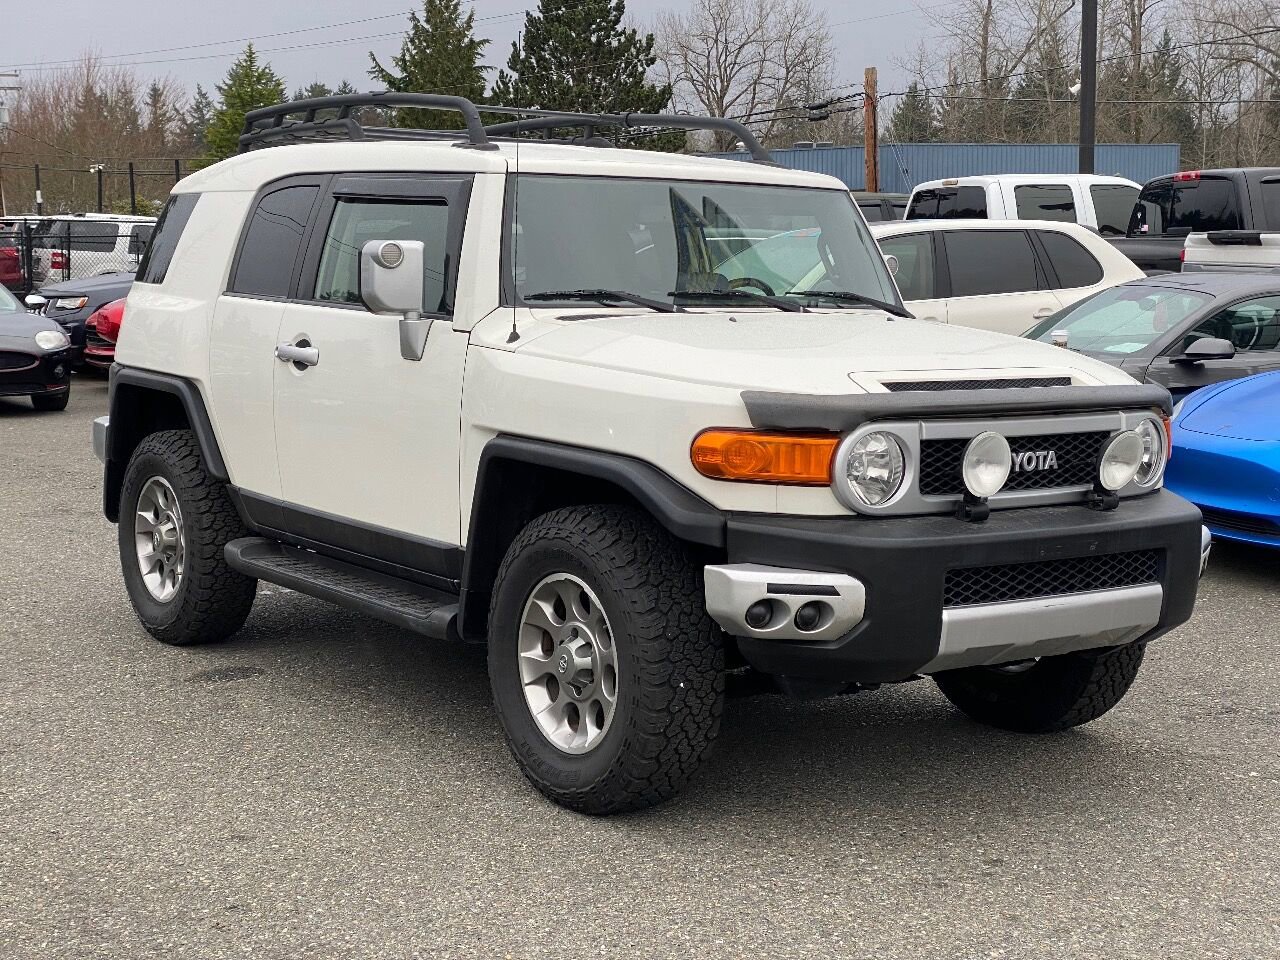 2011 Toyota FJ Cruiser for Sale in Bellevue, WA (Test Drive at Home) -  Kelley Blue Book